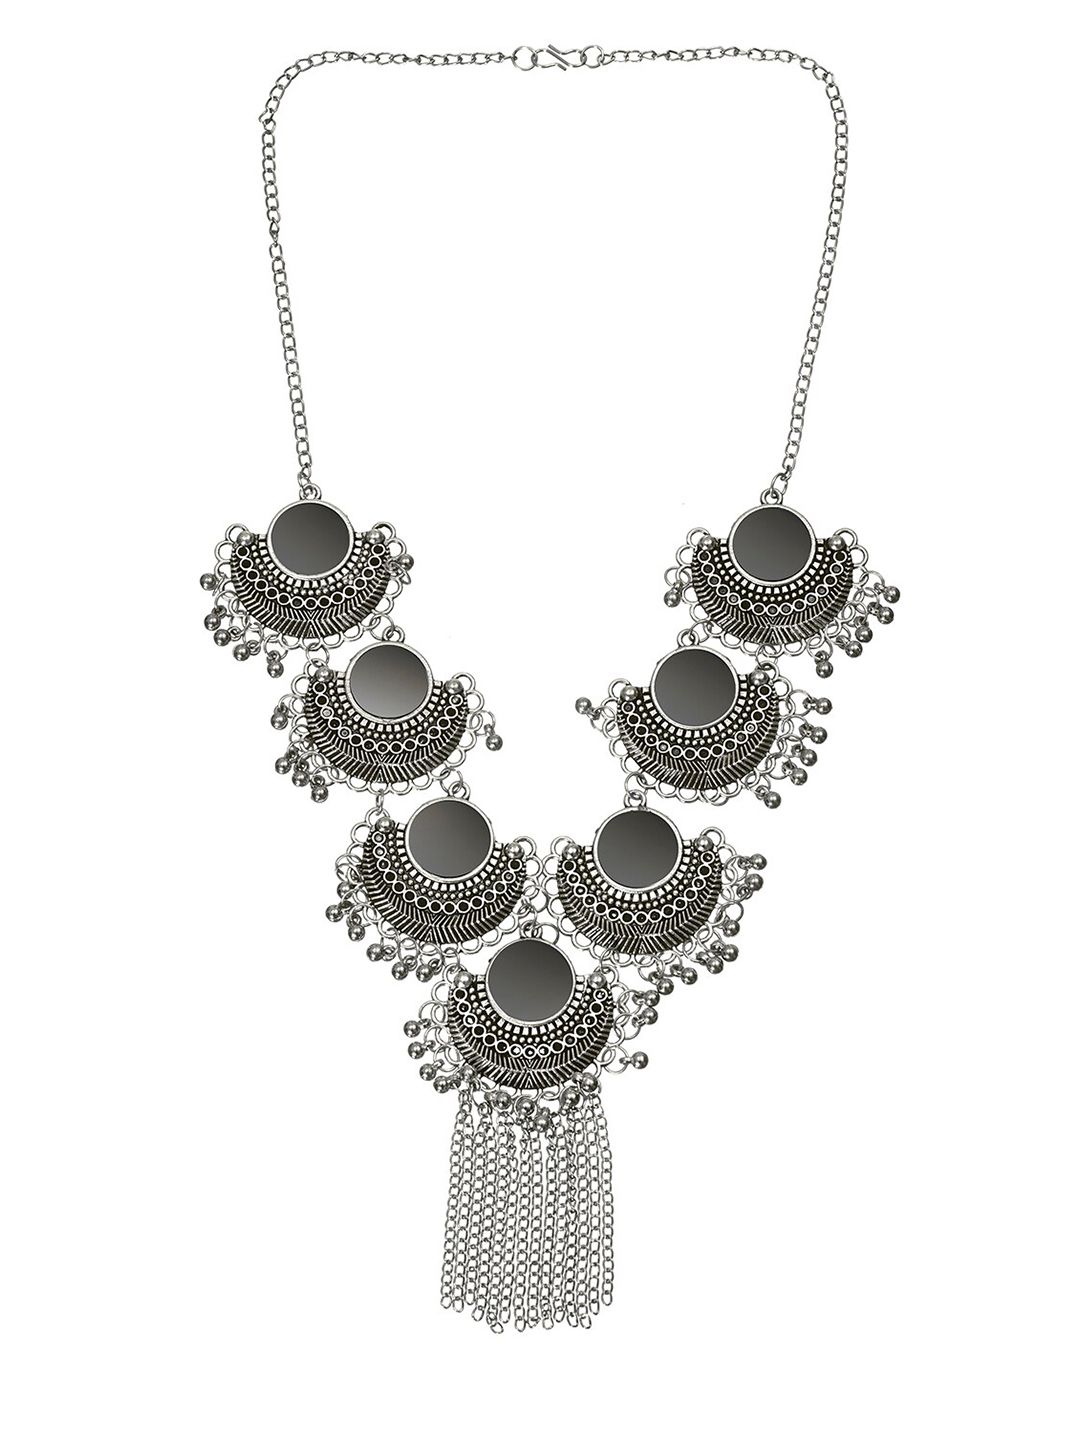 INDYA Oxidised Silver-Plated Ghungroo Necklace Price in India